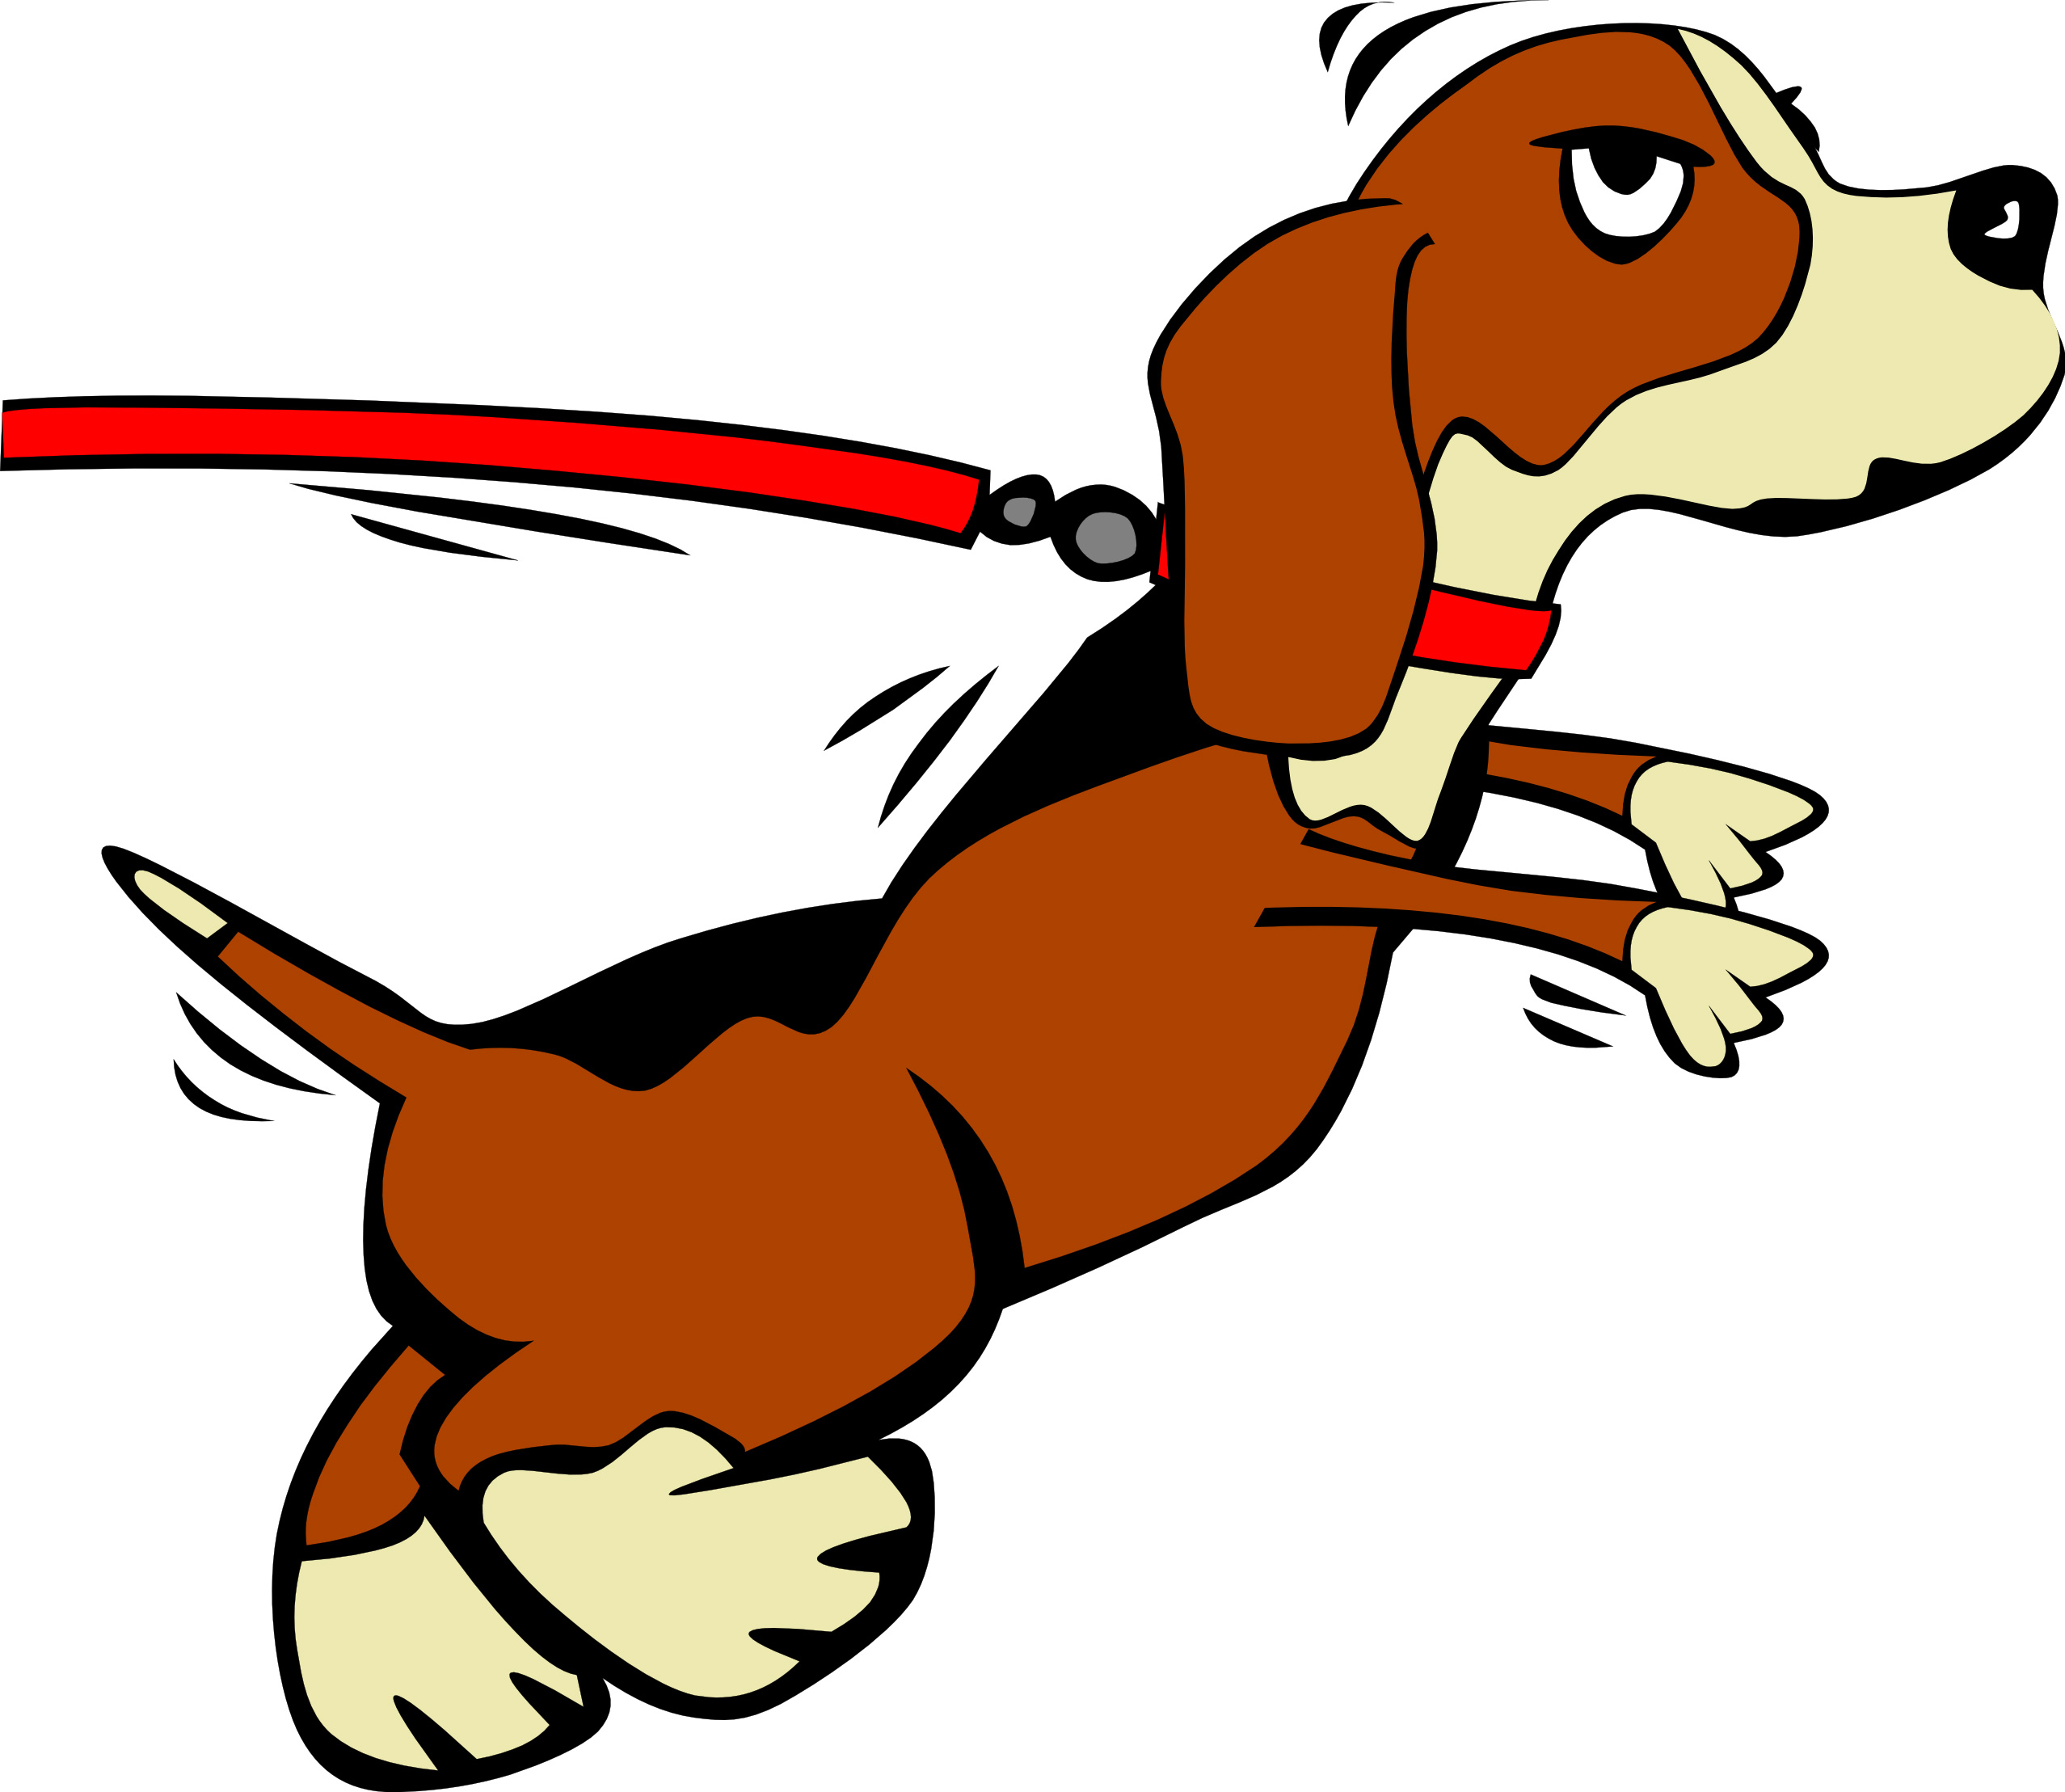 Beagle Dog Cartoon Pictures And Wallpaper